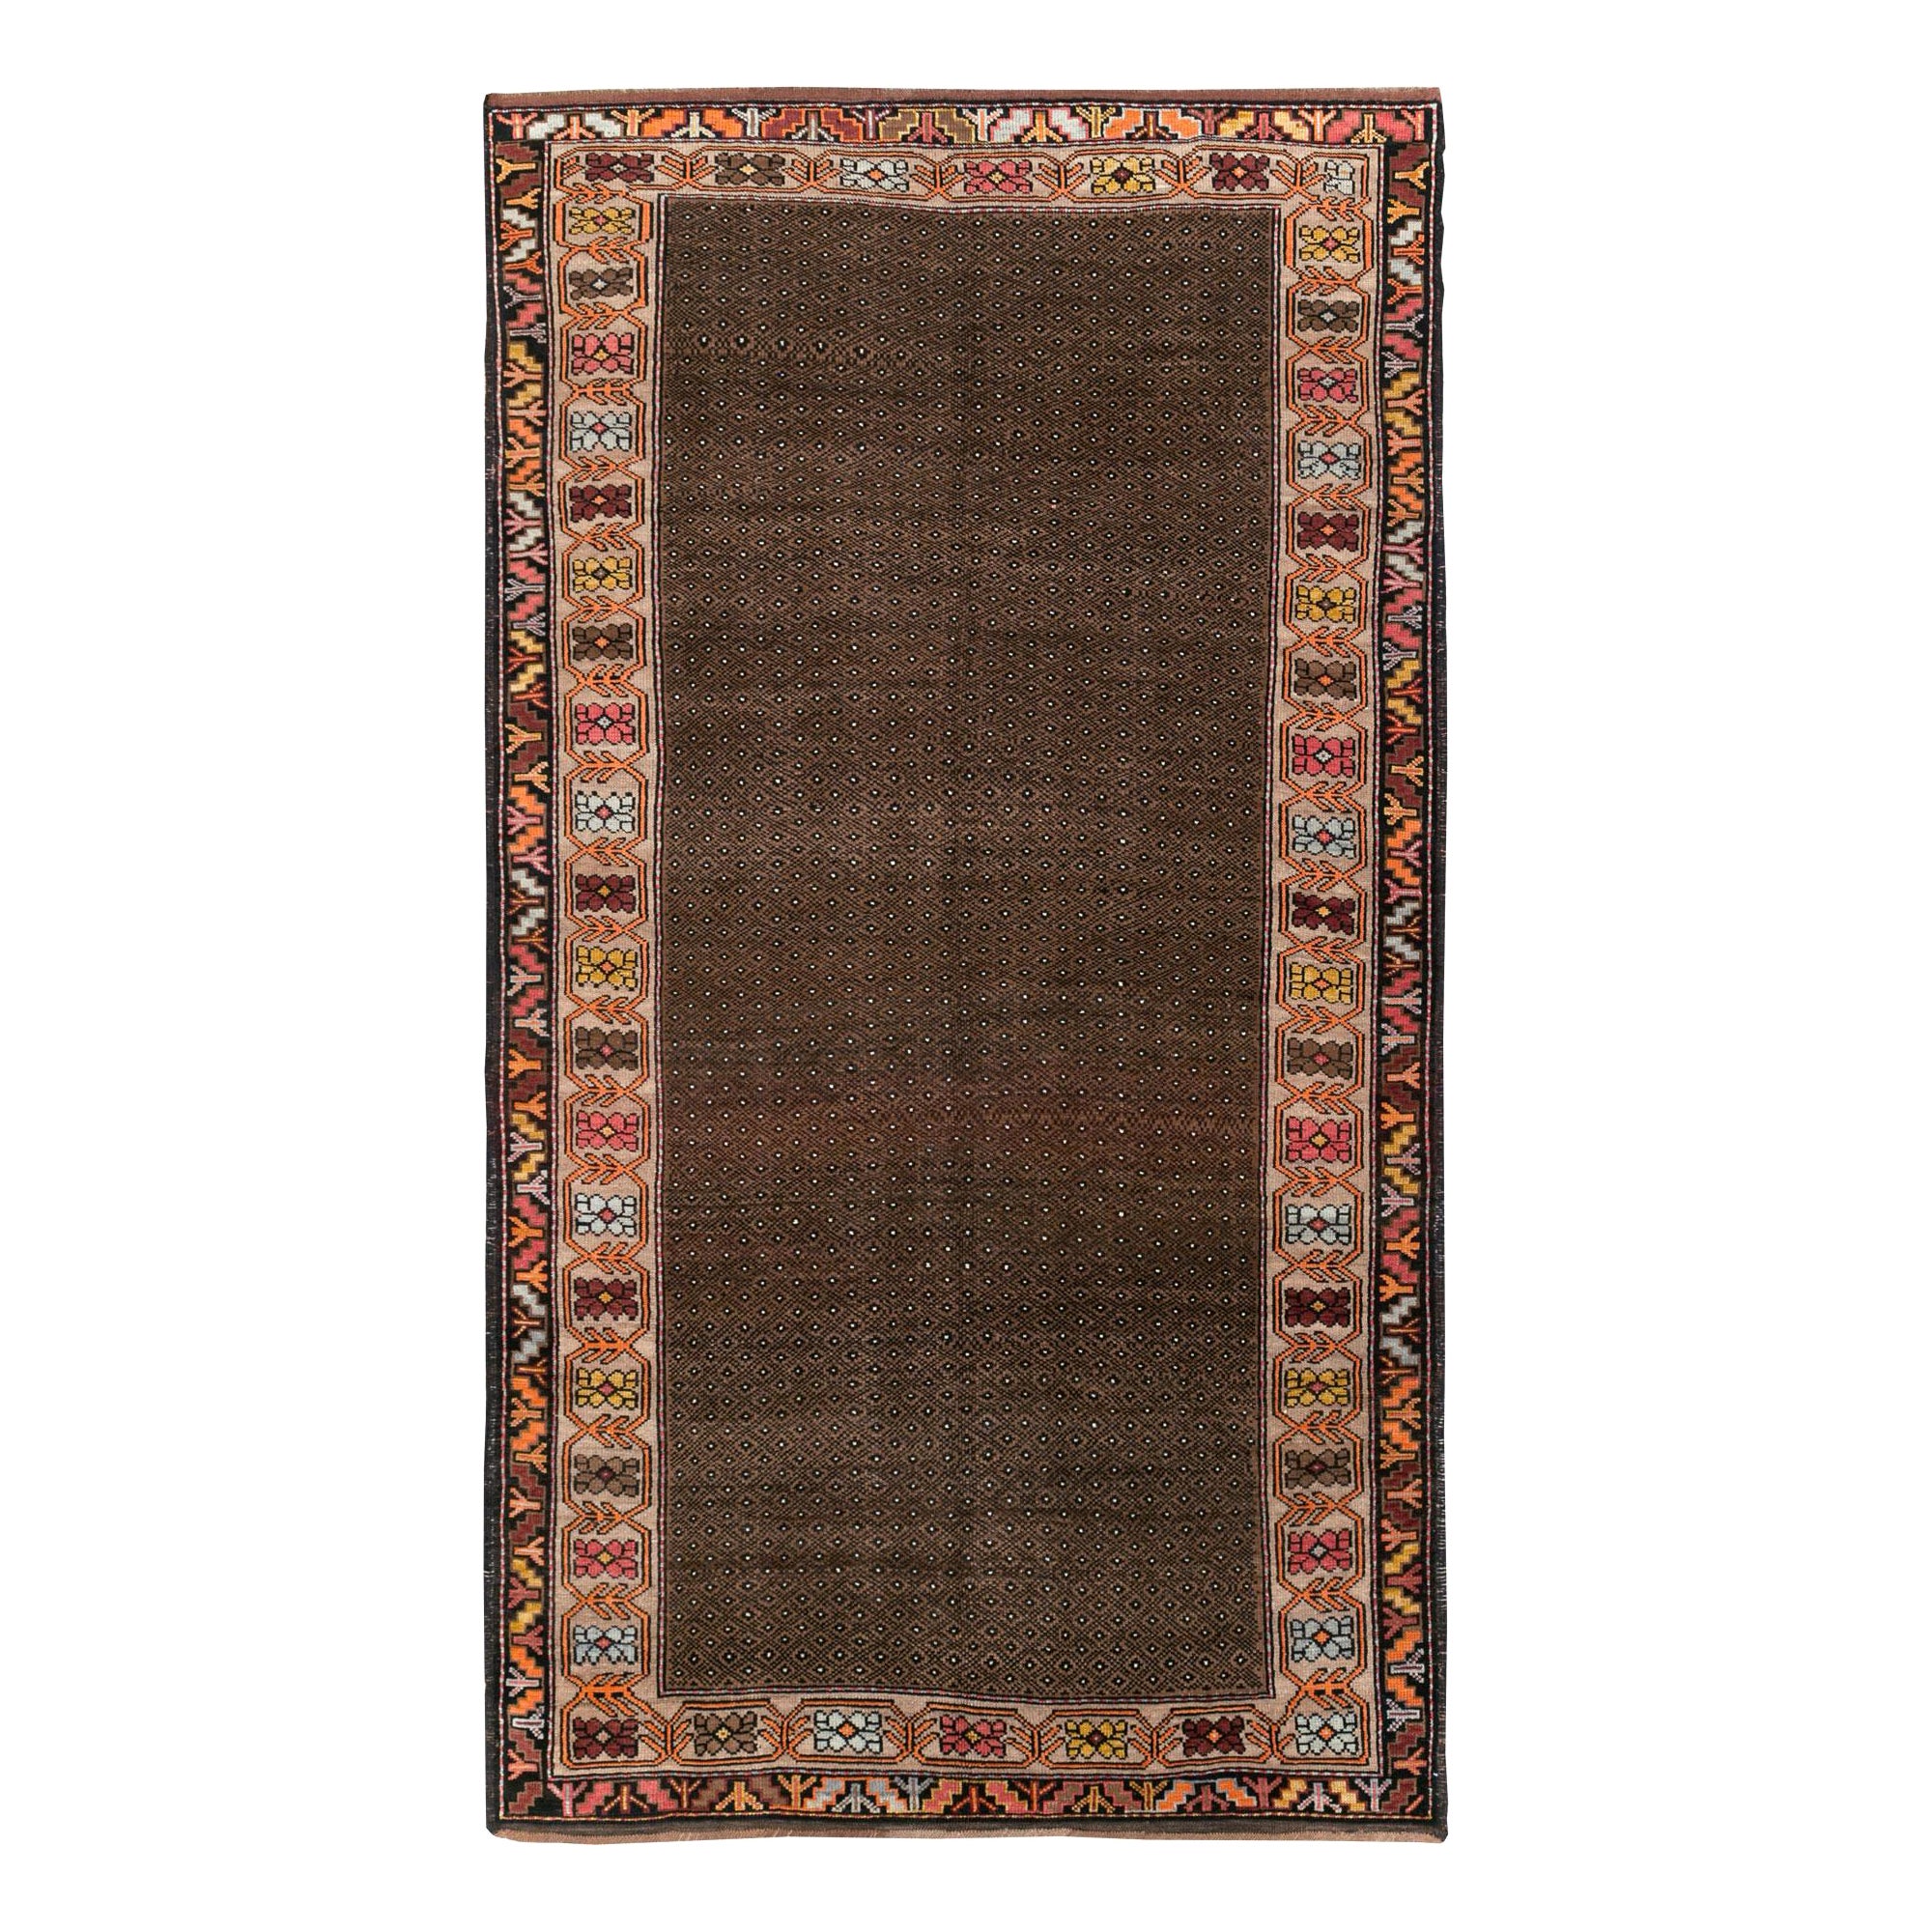 Galerie Shabab Collection Mid-20th Century Handmade Turkish Tribal Gallery Rug